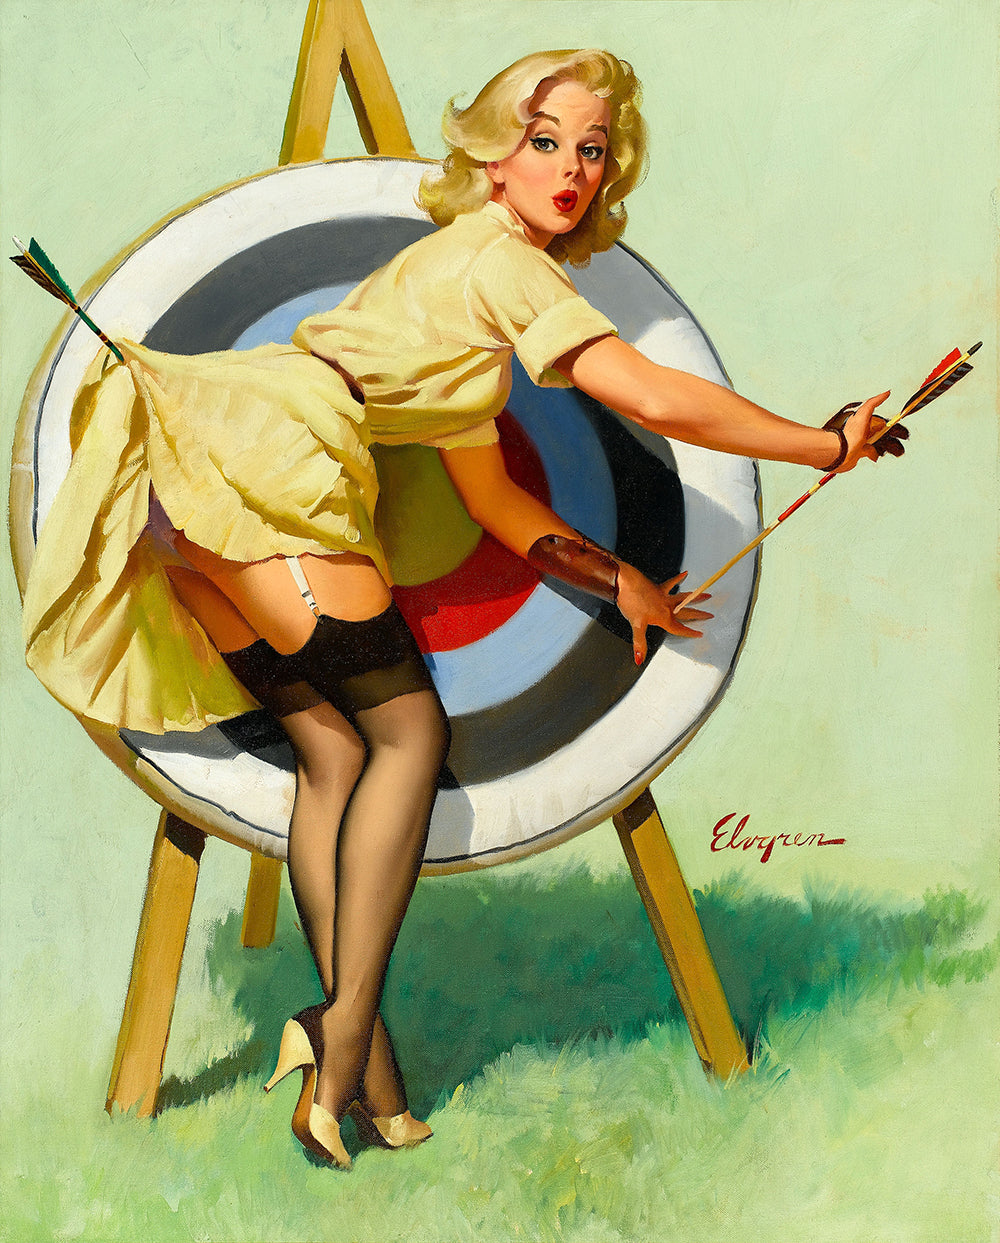 Right_on_target_1964 by Gil Elvgren